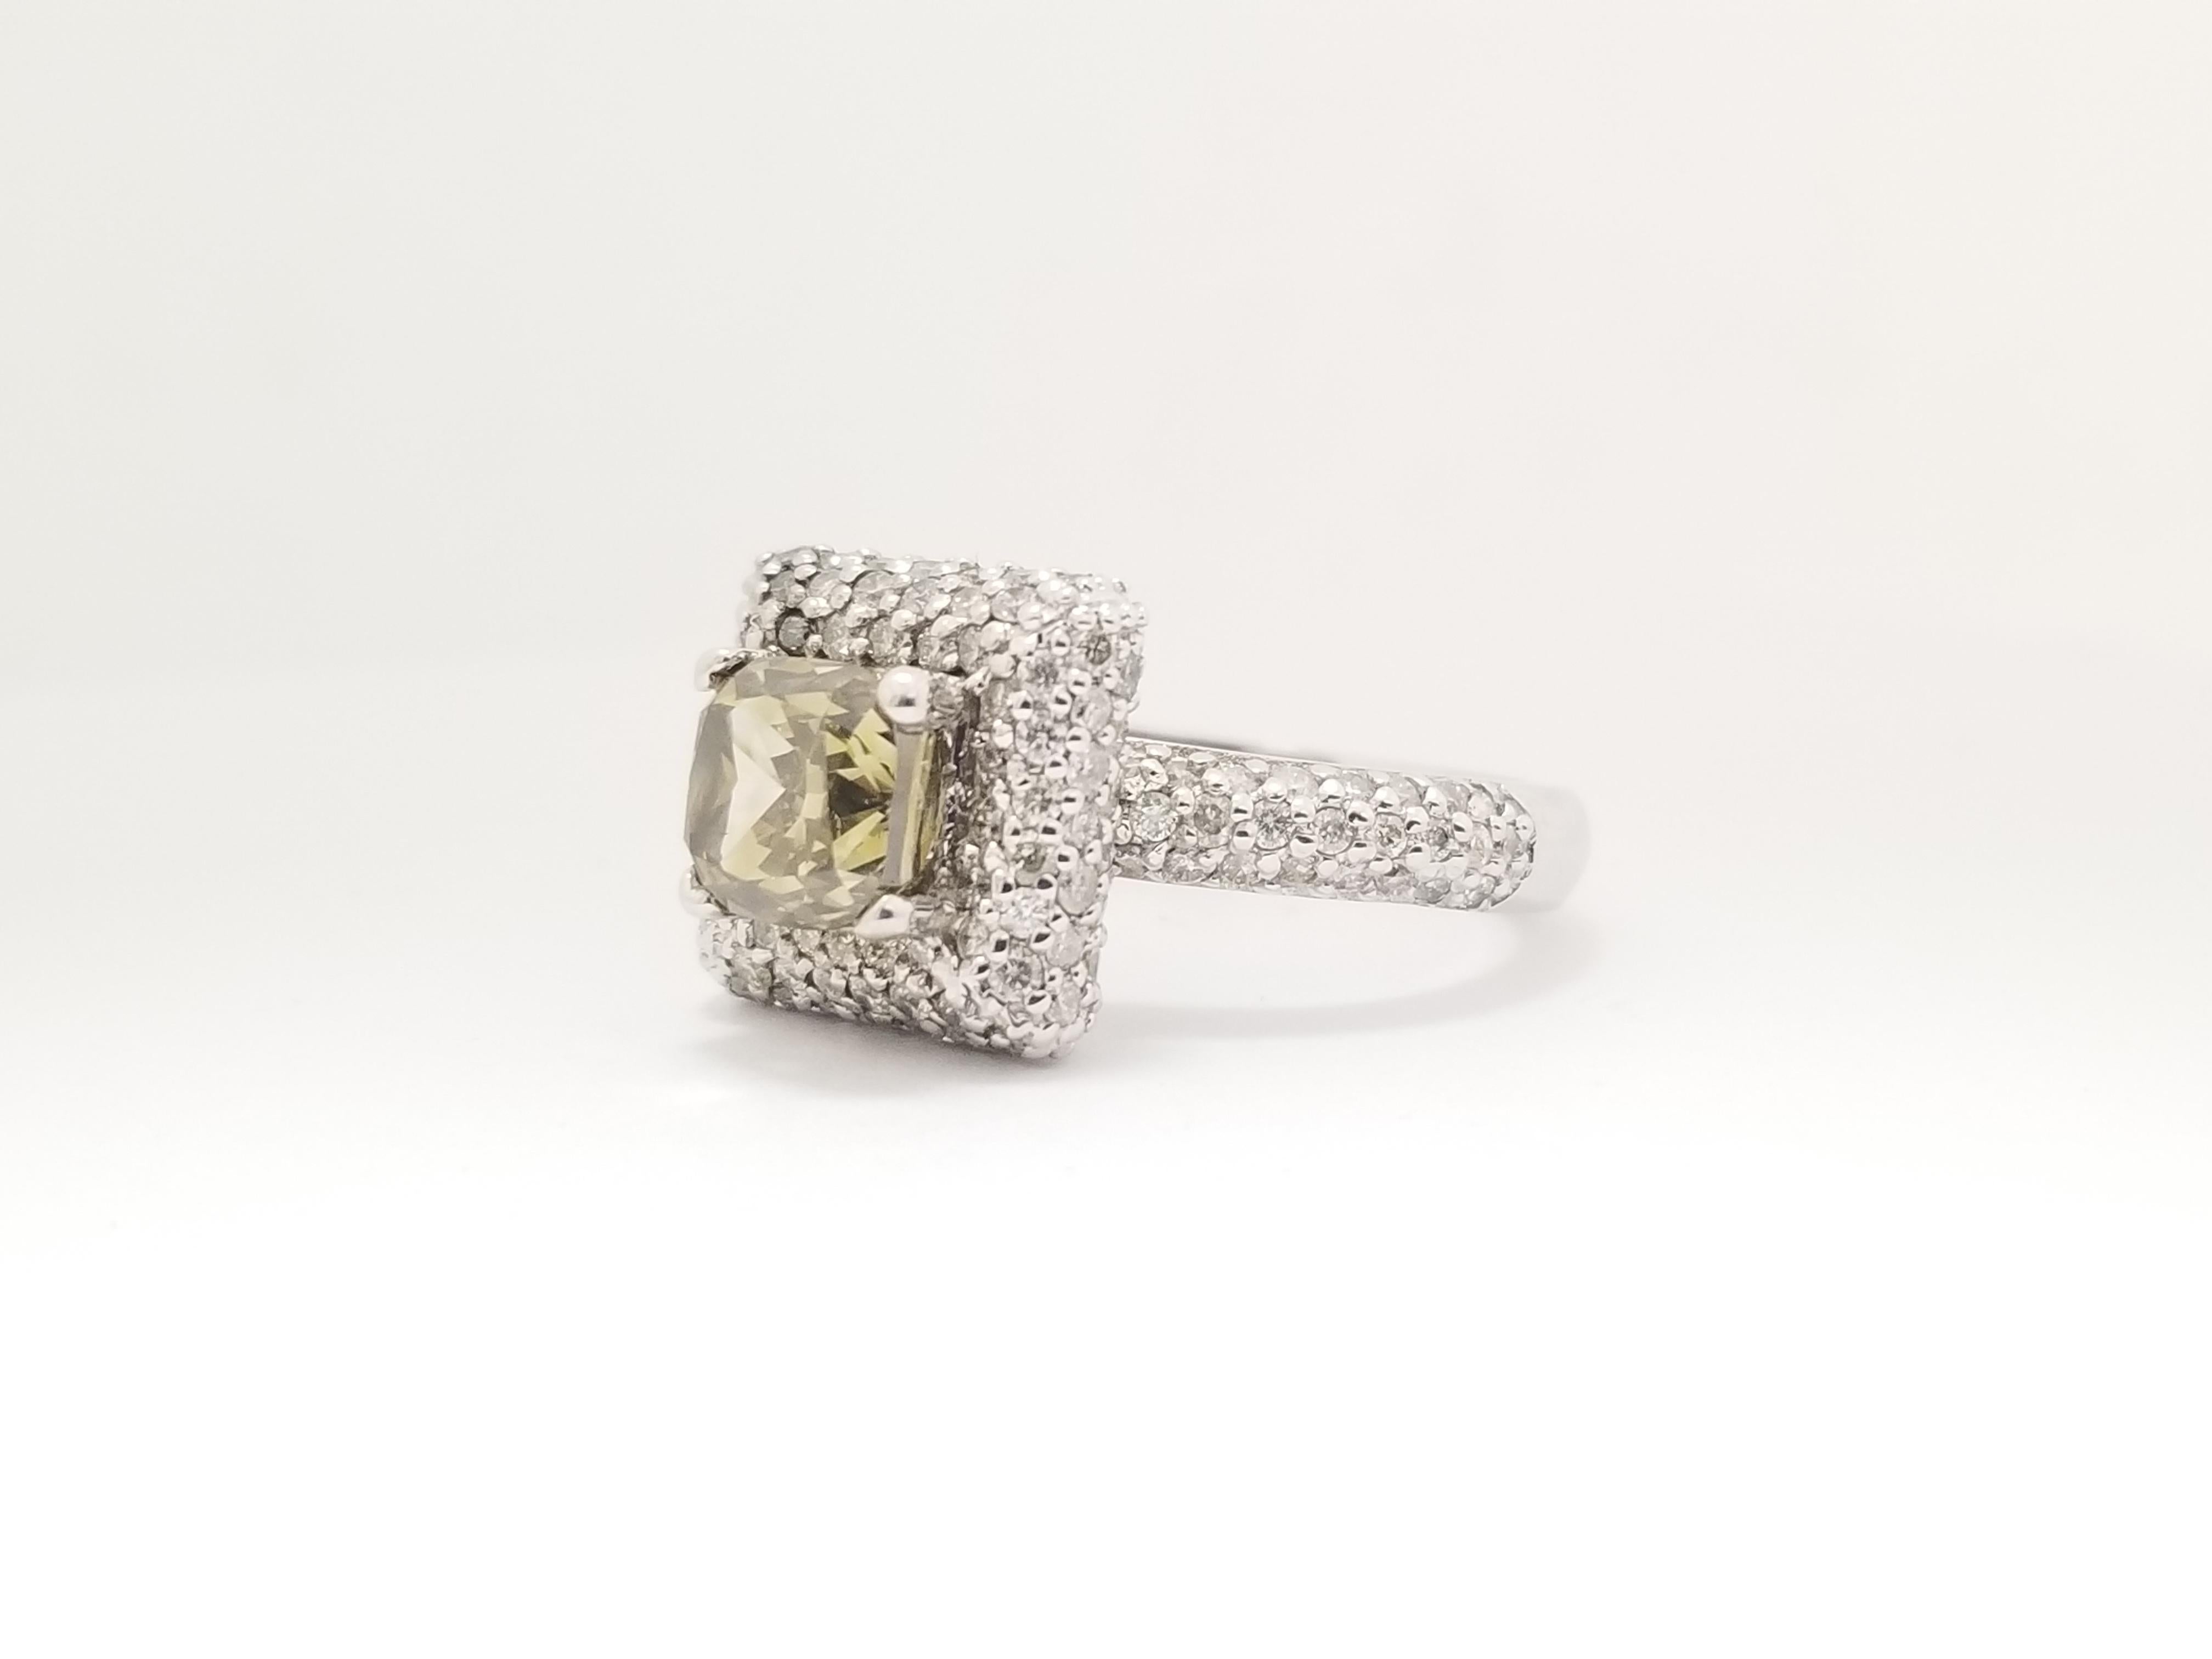 GIA natural cushion cut diamond weighs 2.37 Carats. 4 prong center set surrounded by 1.50 cttw paved round white diamonds 14K white gold setting. 
Color: Natural Fancy Dark Brown-Greenish Yellow , Vs2 clean 
Ring size 7 can be resize.